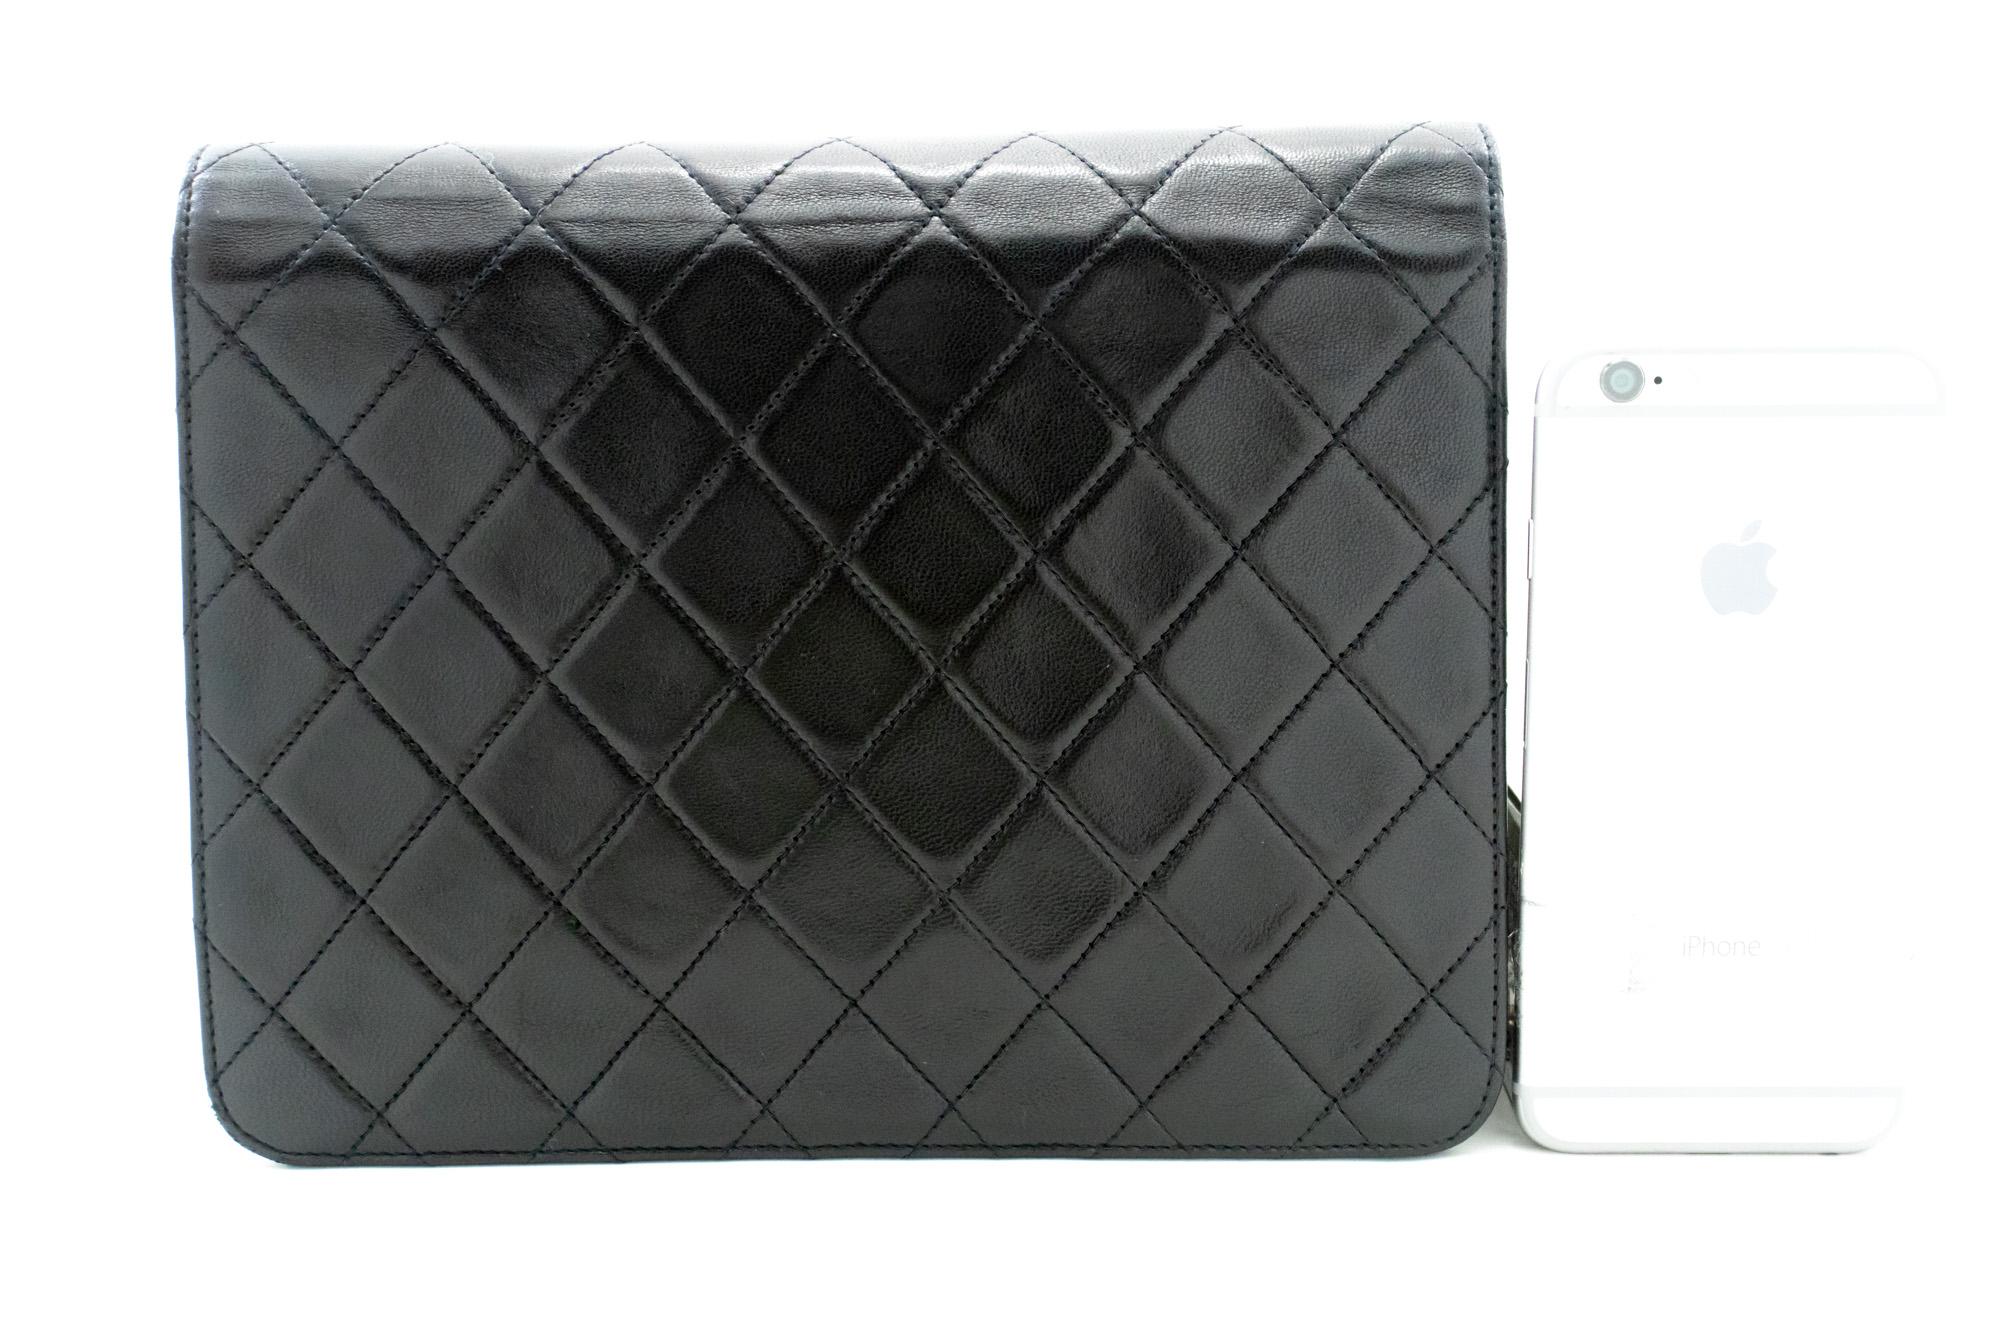 CHANEL Small Chain Shoulder Bag Black Clutch Flap Quilted Lambskin In Good Condition For Sale In Takamatsu-shi, JP